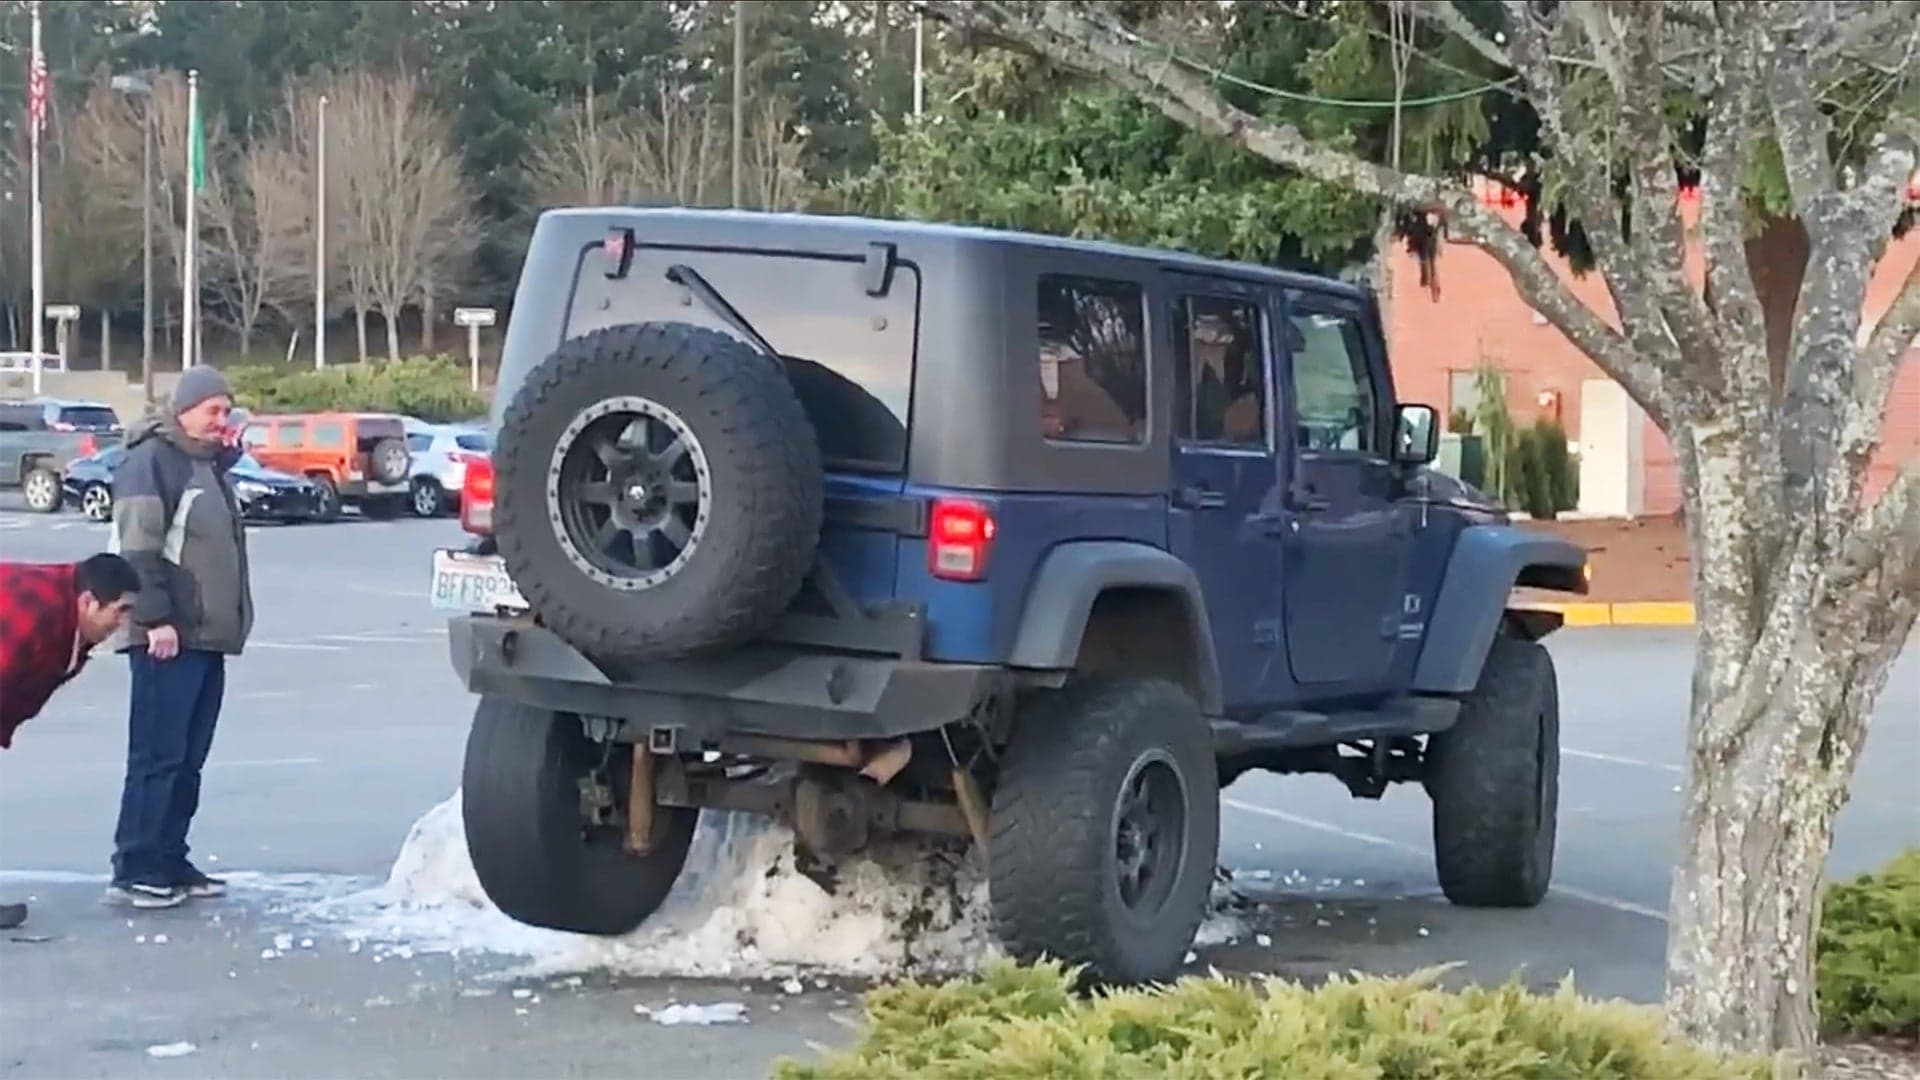 Watch a Lifted Jeep Wrangler Get Stuck on a Tiny Snow Pile in a Parking Lot